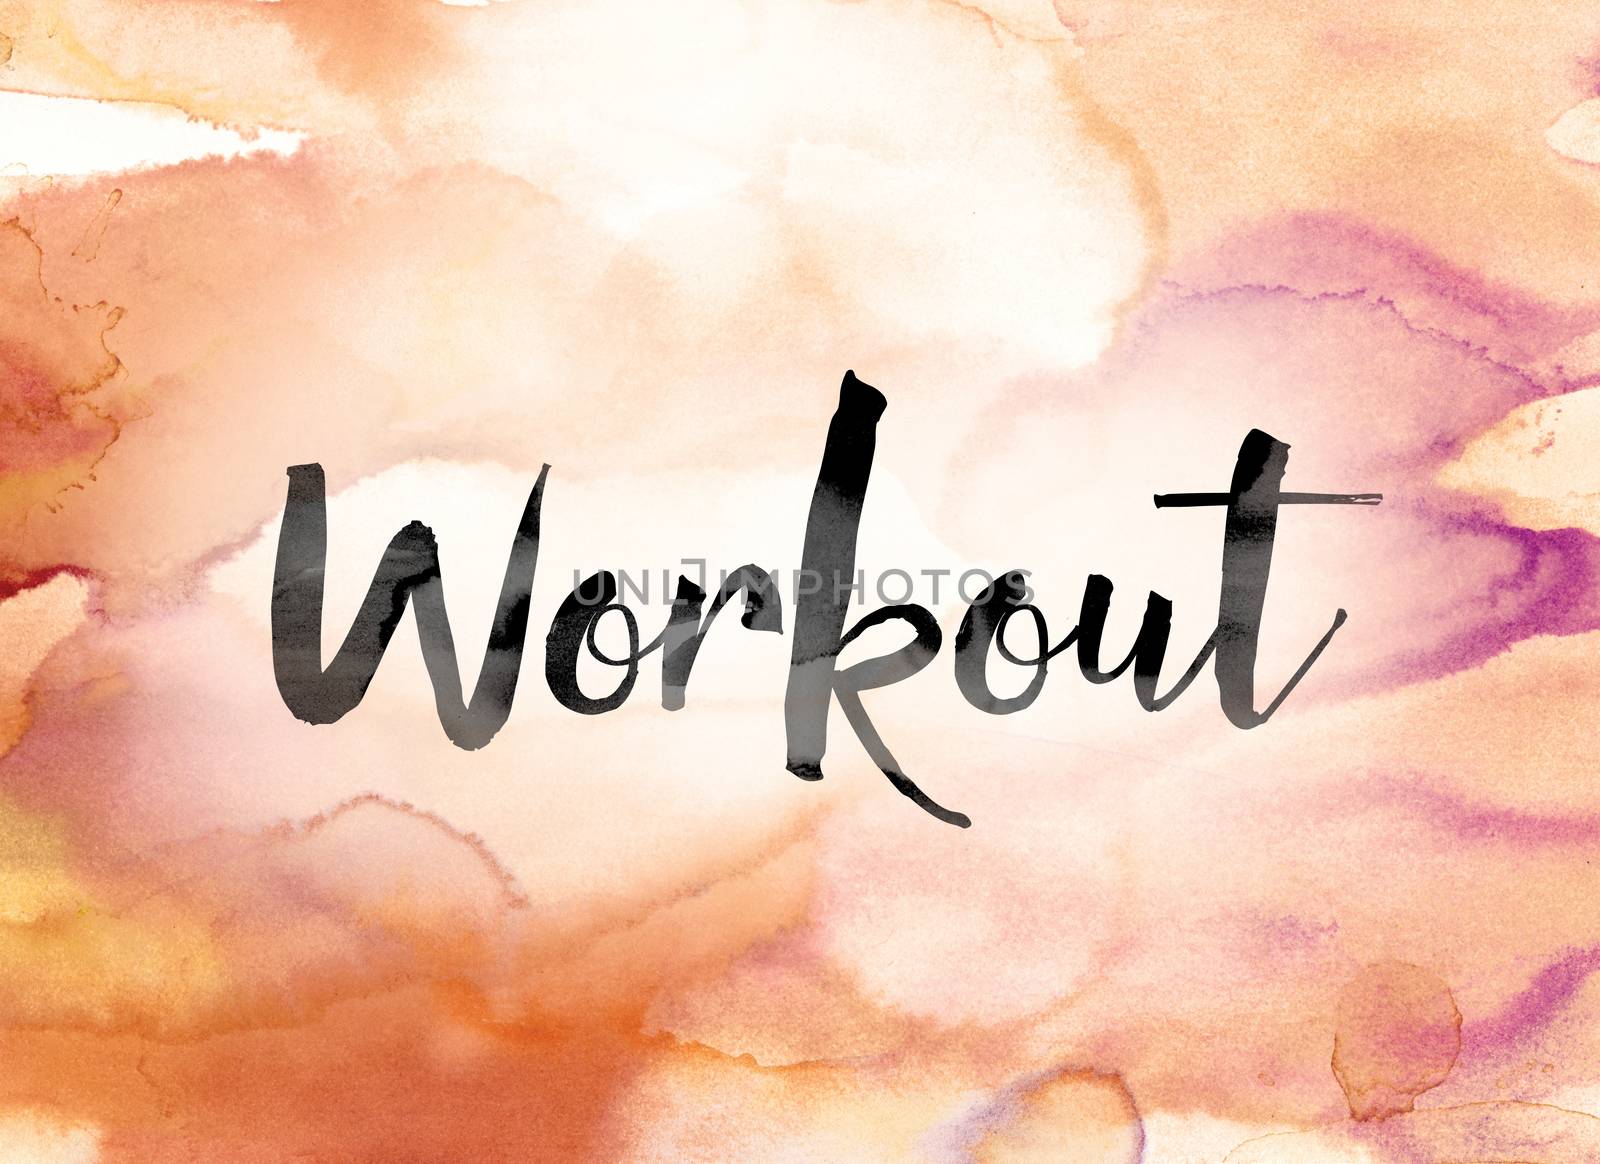 Workout Colorful Watercolor and Ink Word Art by enterlinedesign